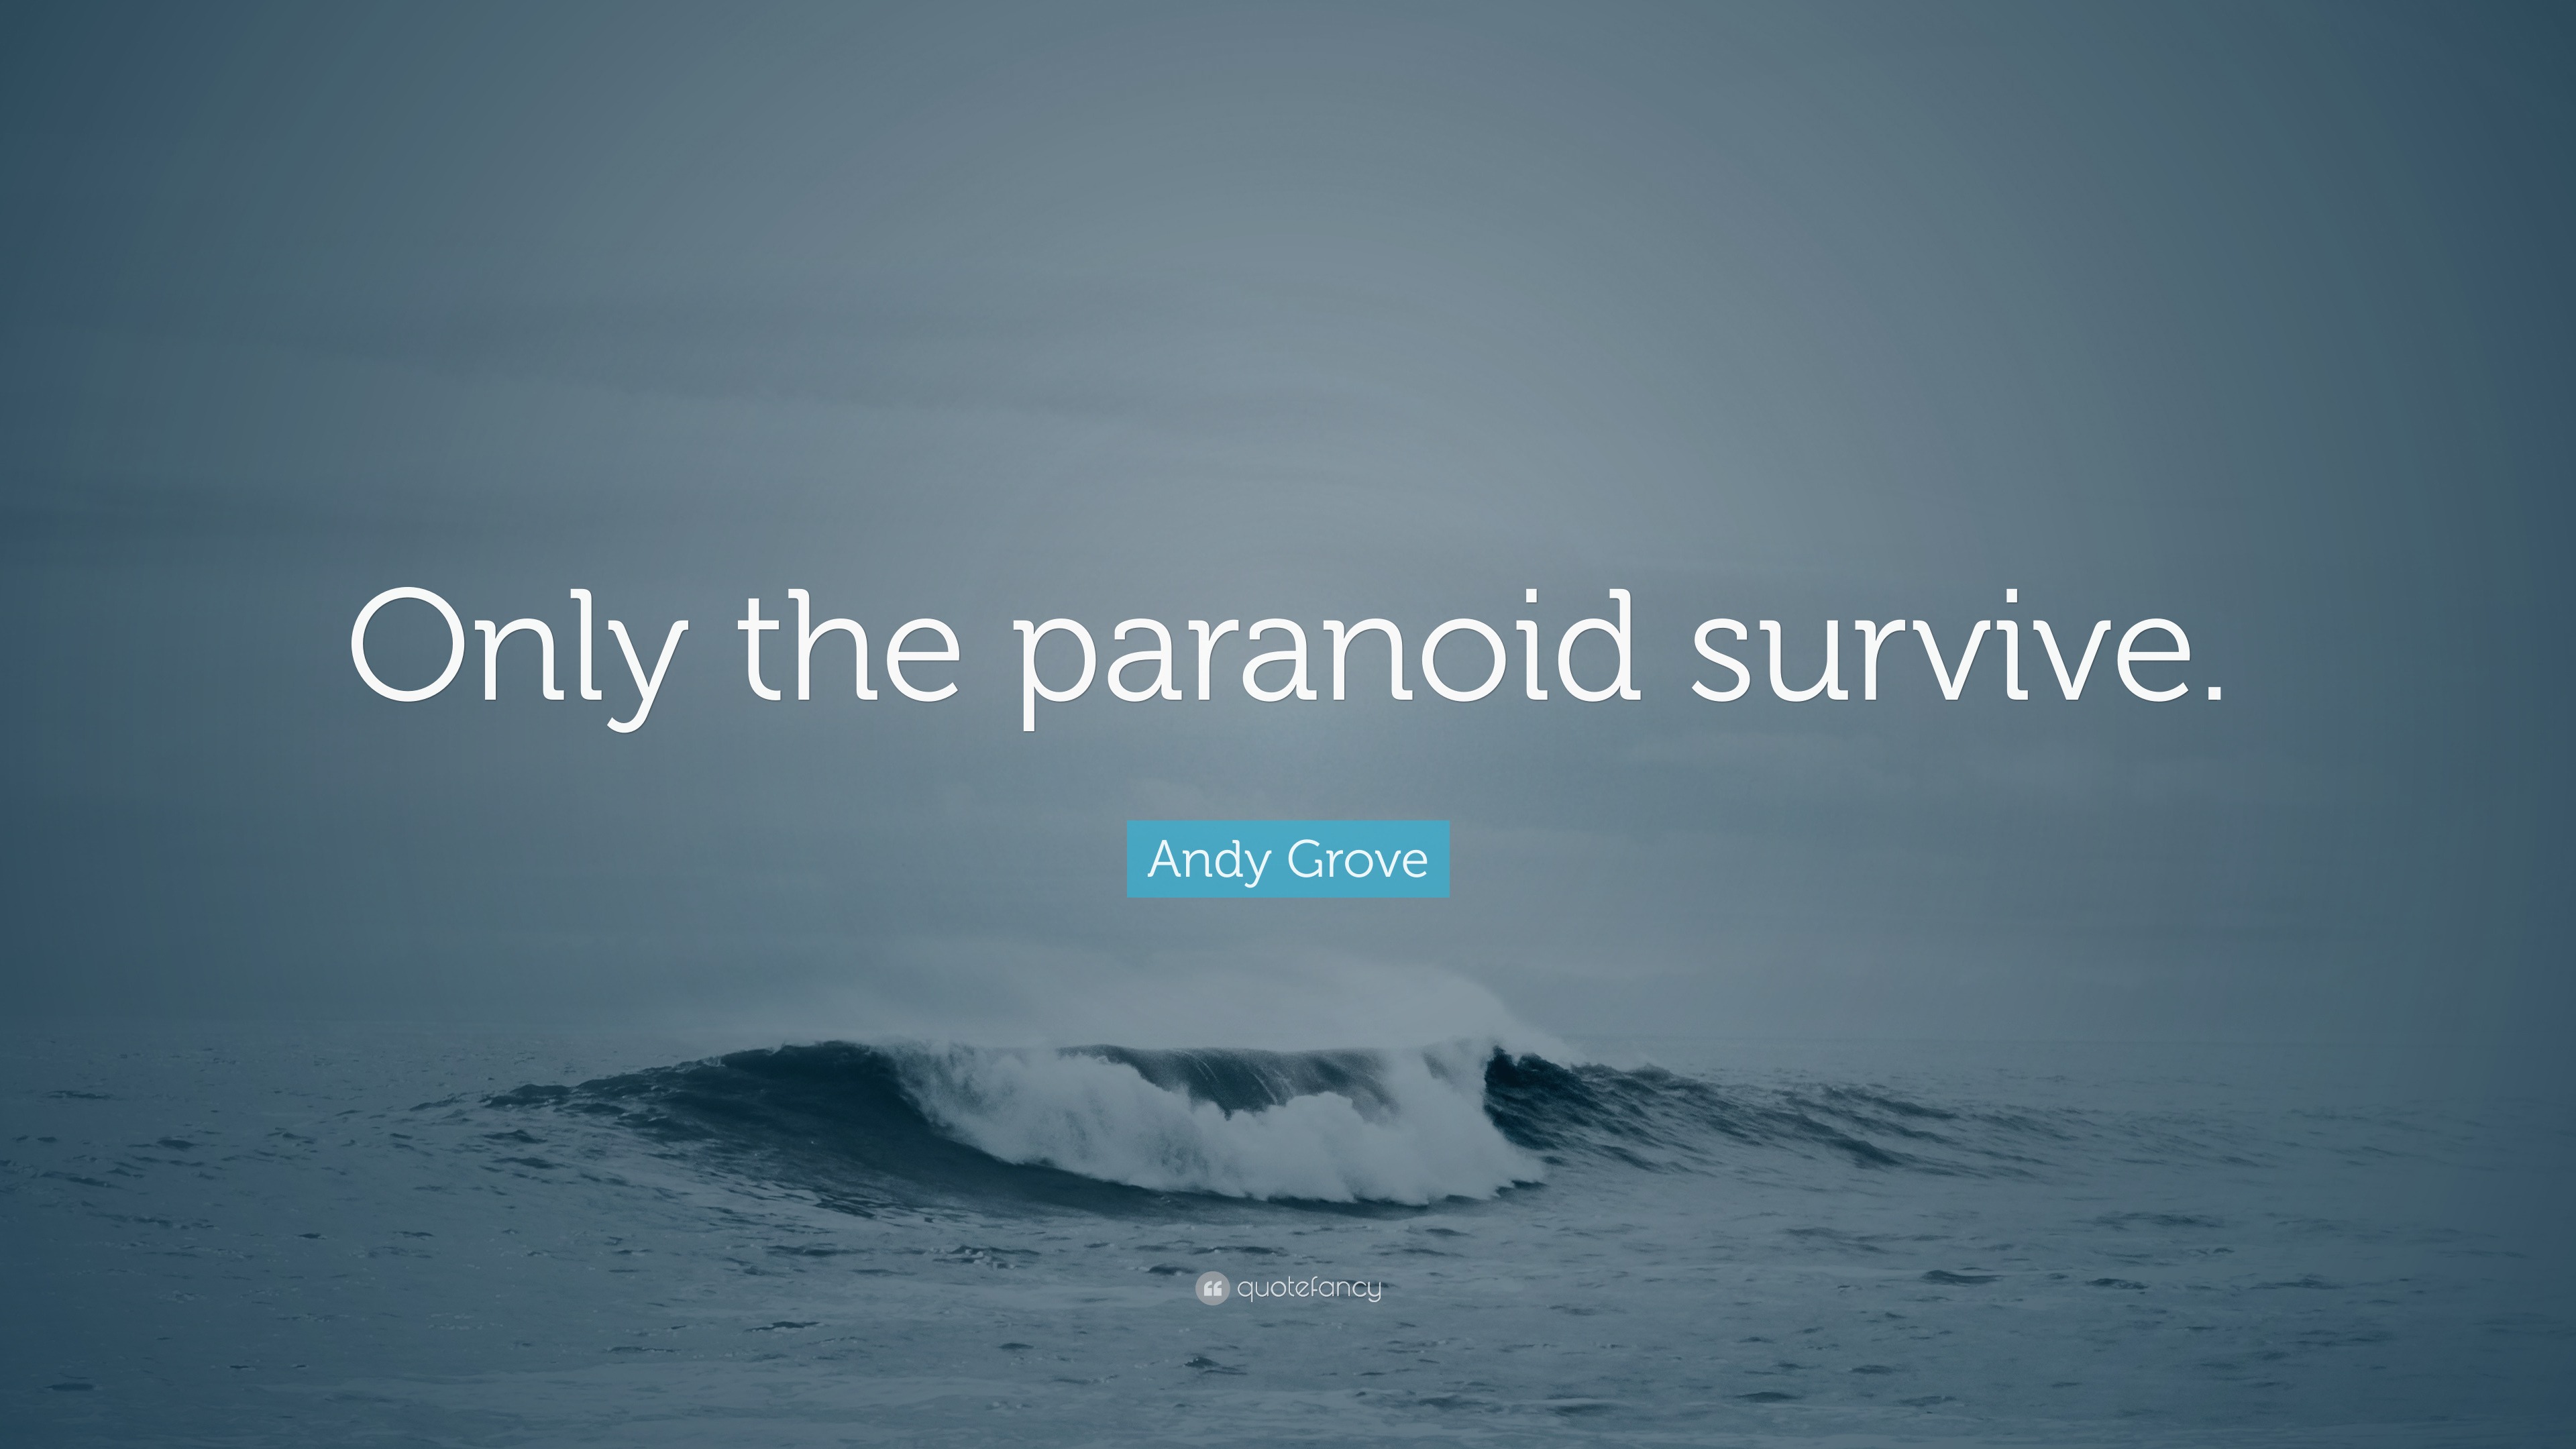 [Image: 4697881-Andy-Grove-Quote-Only-the-paranoid-survive.jpg]